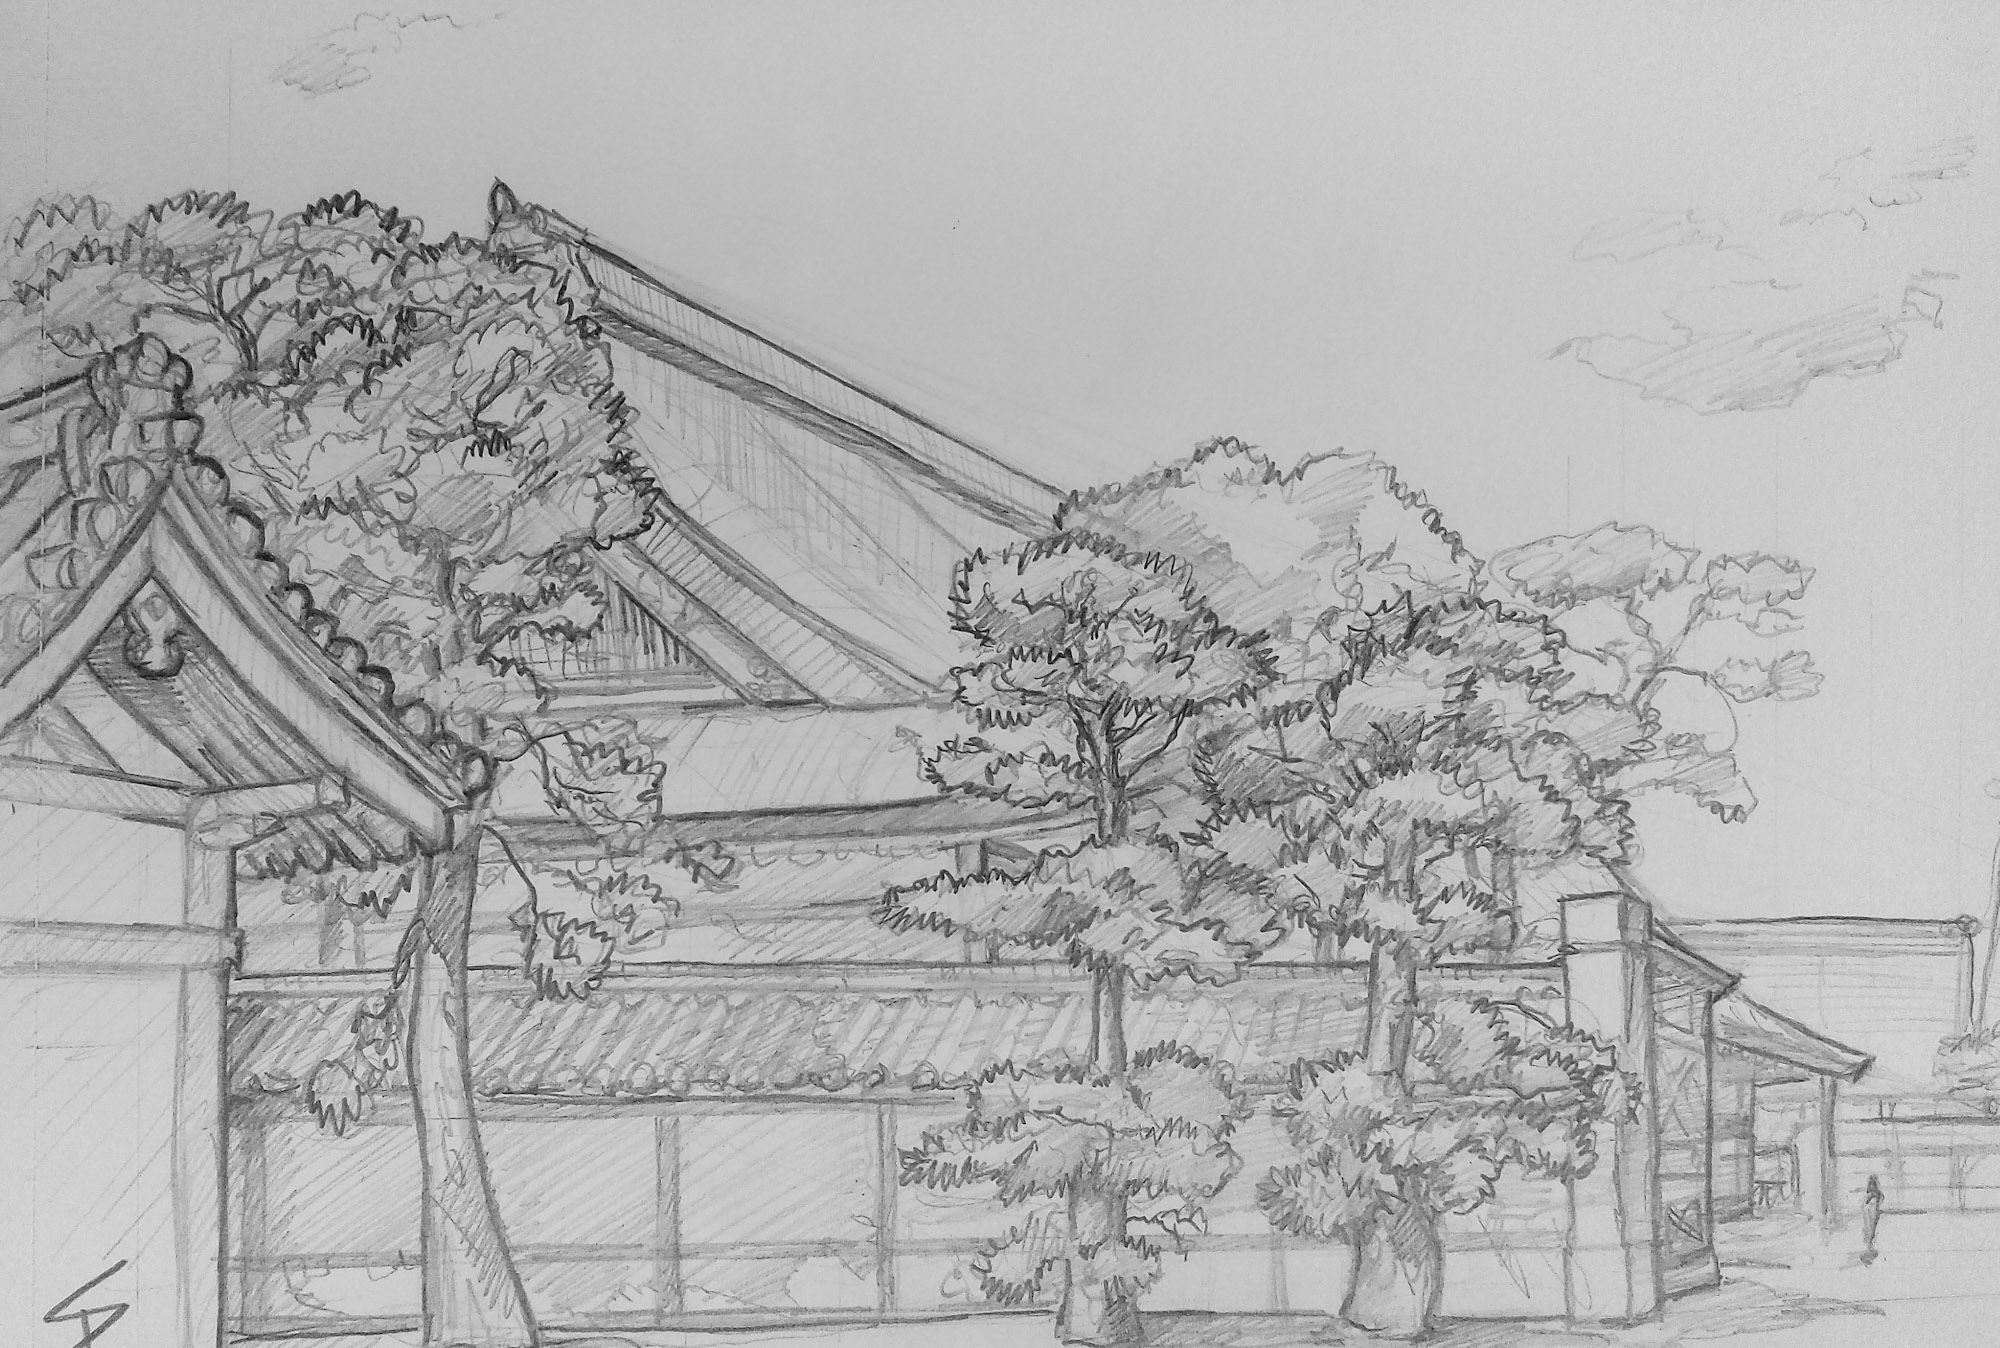 Urban art - Kamigyo Ward, Kyoto, Japan.‘Kyoto Imperial Palace.’ Sketched from a public seating area, set up to give shade to visitors. The Palace is surrounded by a large public park, blooming with cherry blossom, and perfect for a spot of Hanami. sketchbookexplorer.com @davidasutton @sketchbookexplorer Facebook.com/davidanthonysutton #japan #kyoto #kamigyoward #kyotoimperialpalace #travel #travelblog #art #sketching #cheeryblossom #cherryblossomseason